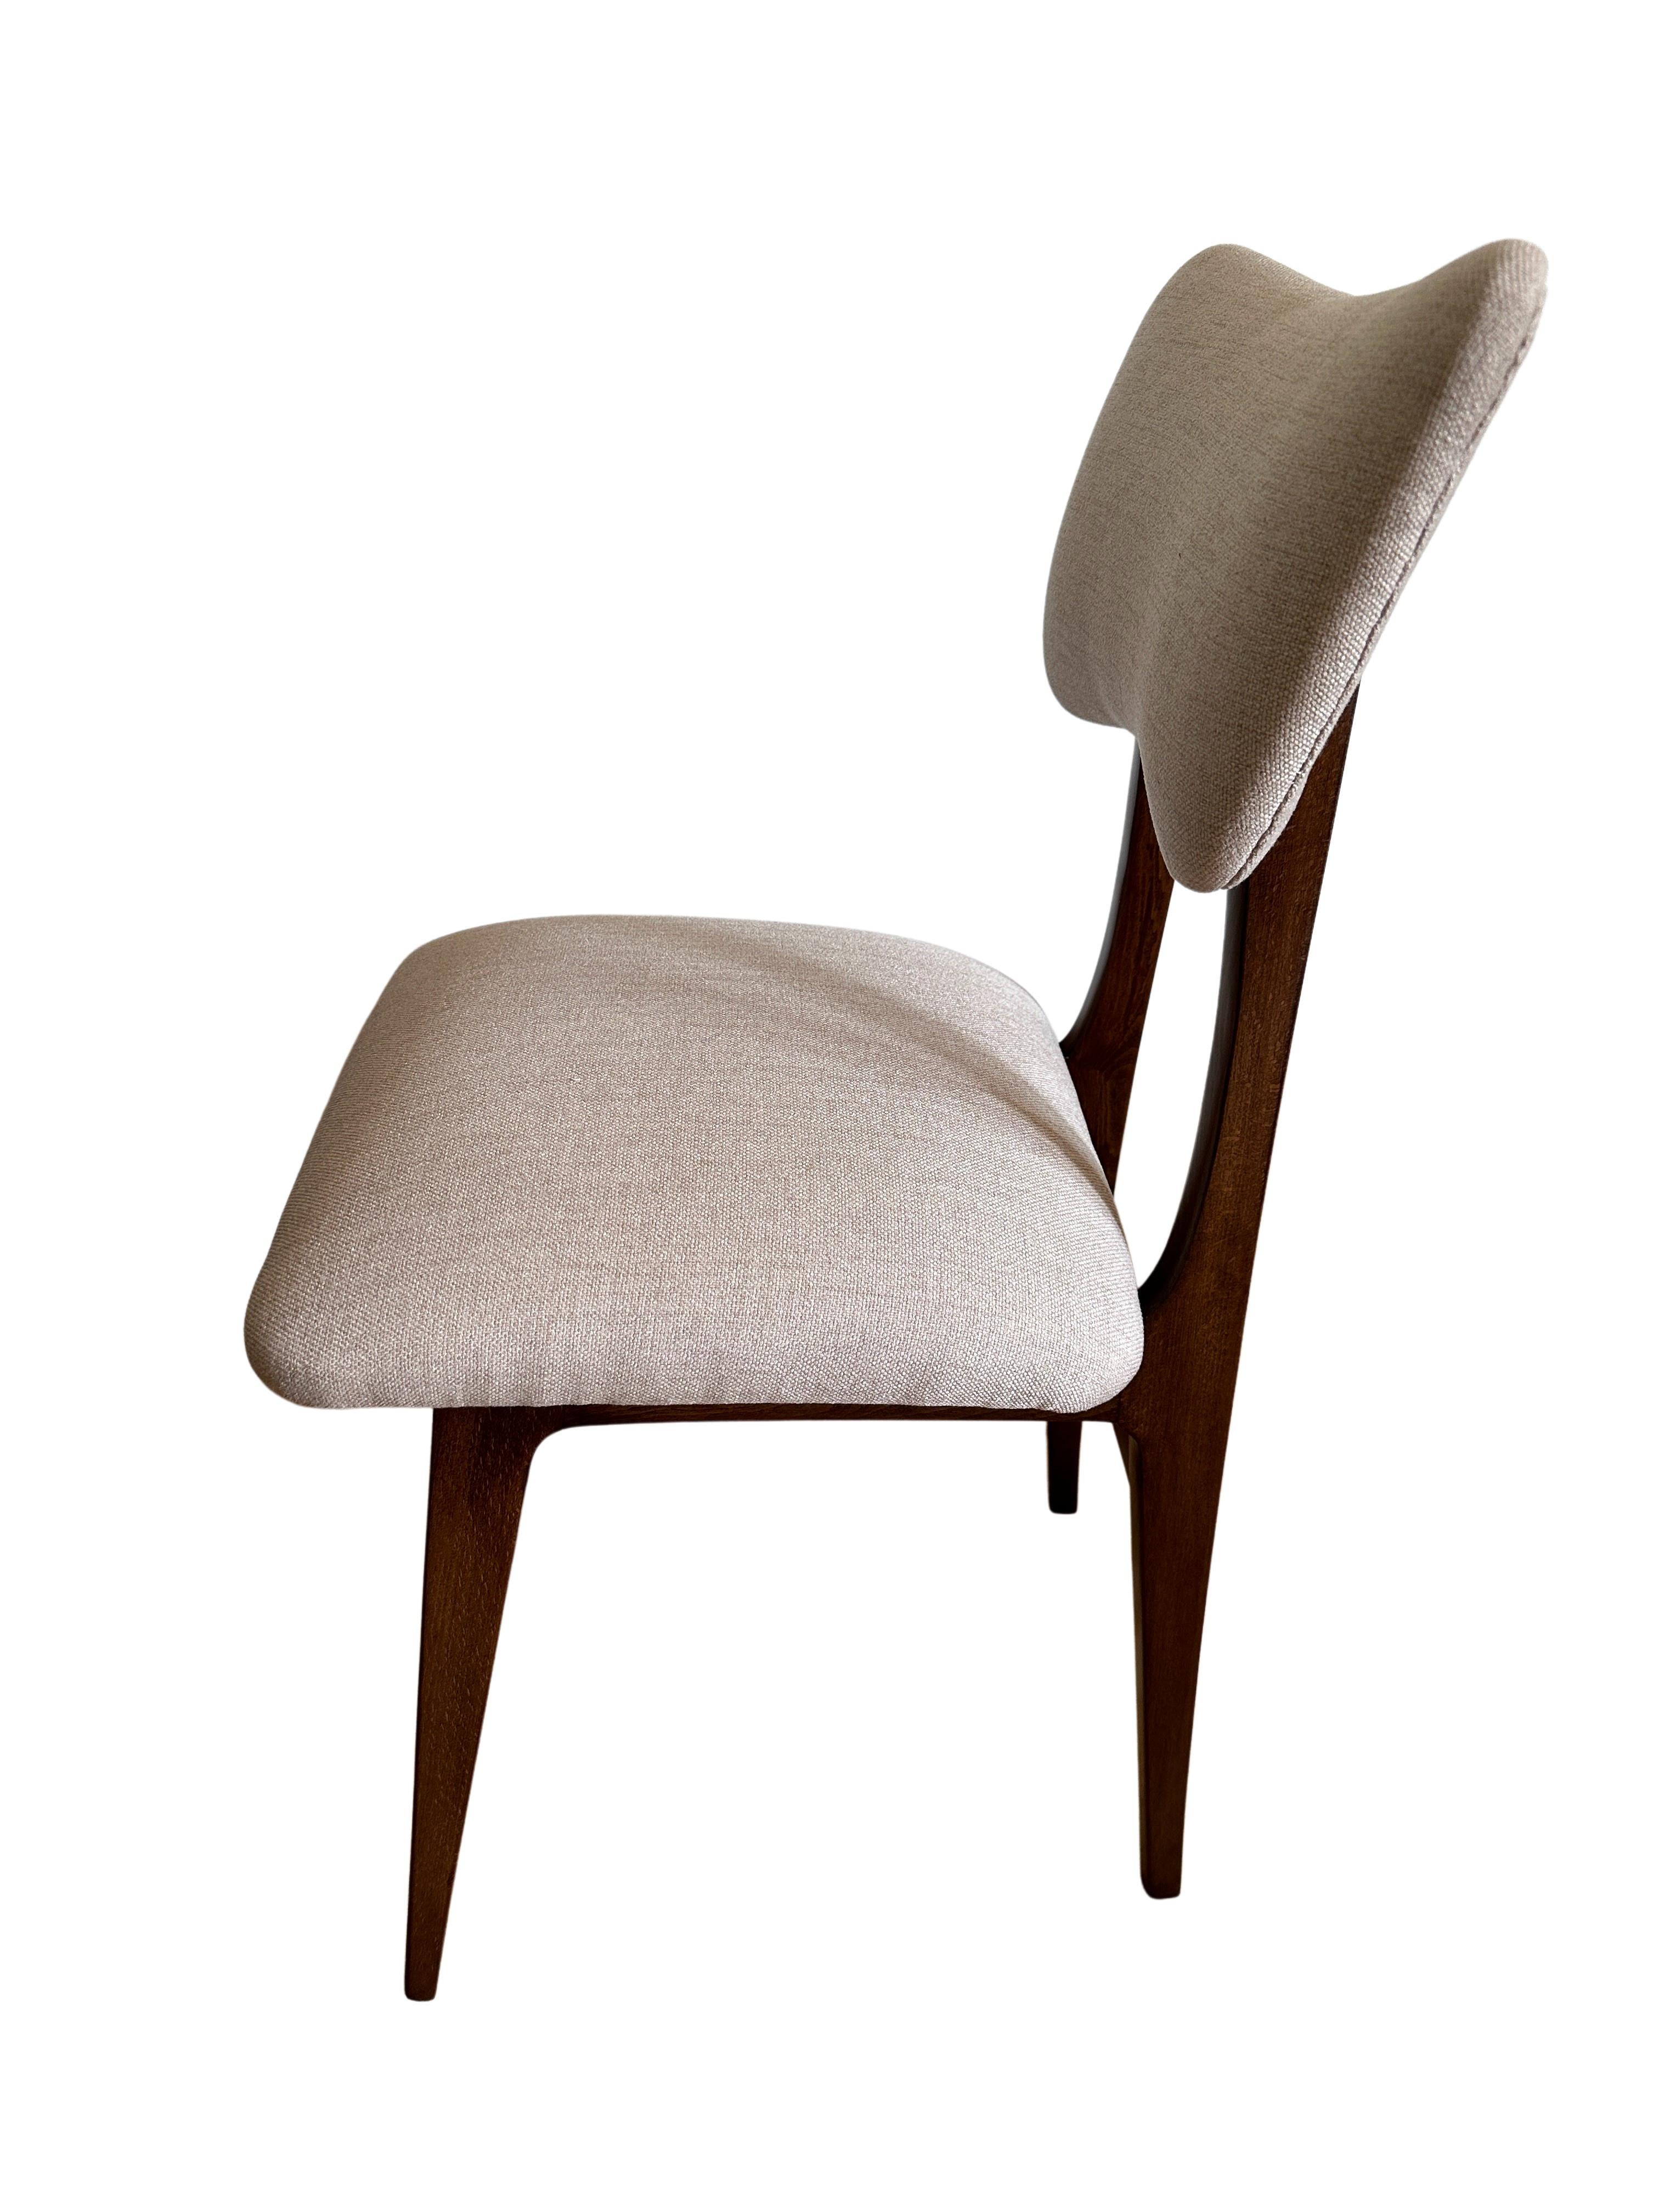 Polish Set of Two Midcentury Beige Dining Chairs, Europe, 1960s For Sale